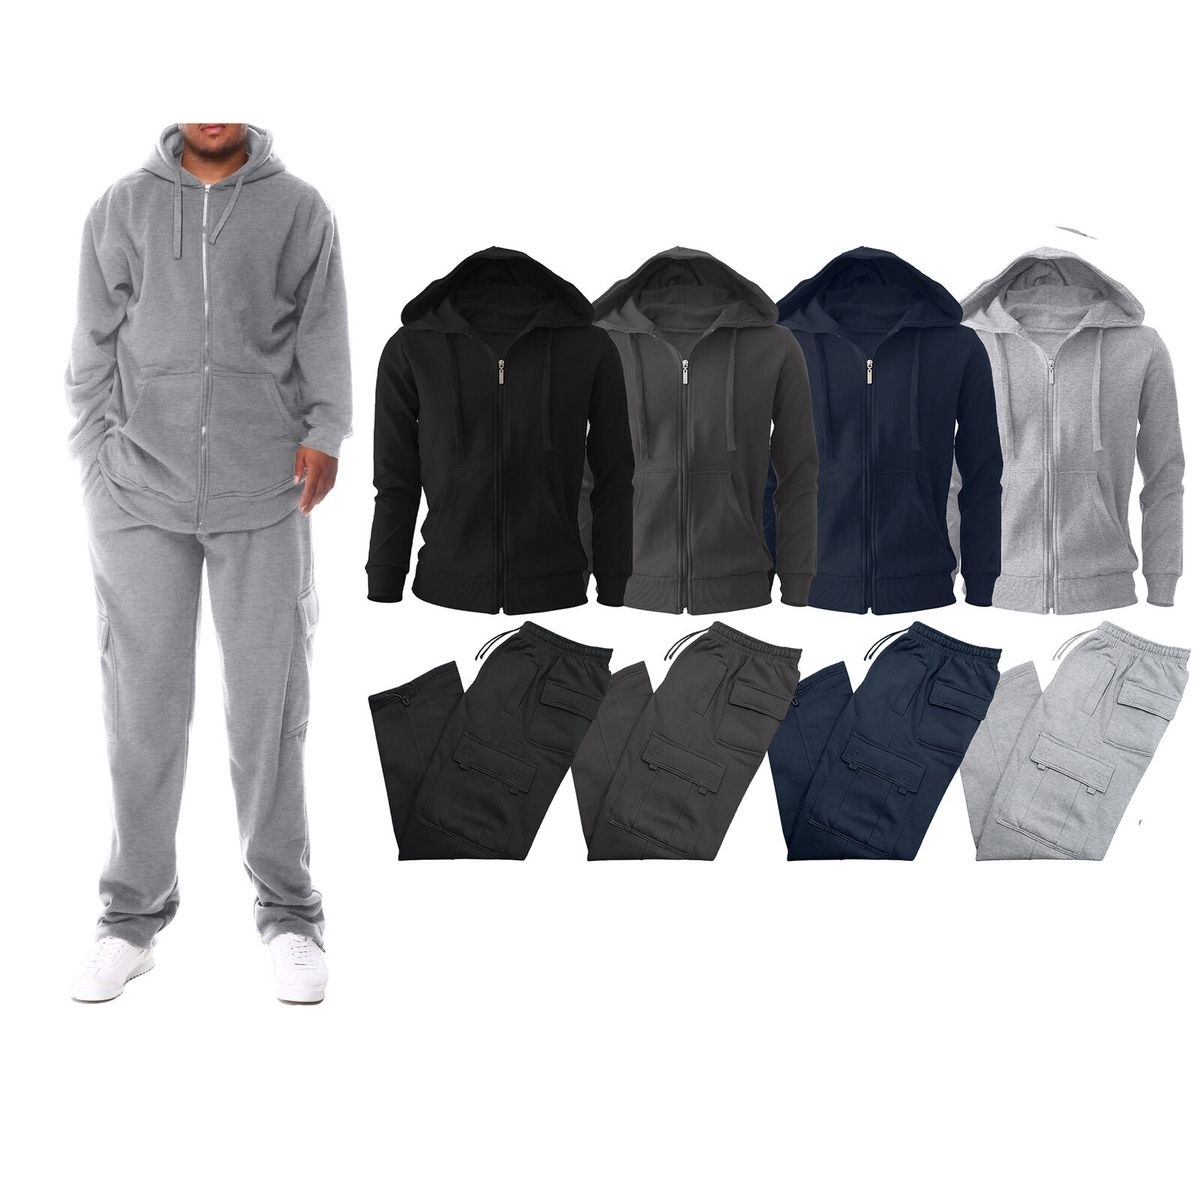 Multi-Pack: Men's Big & Tall Winter Warm Athletic Active Cozy Fleece Lined Multi-Pocket Full Zip Up Cargo Tracksuit - Navy, 2-pack, 3xl